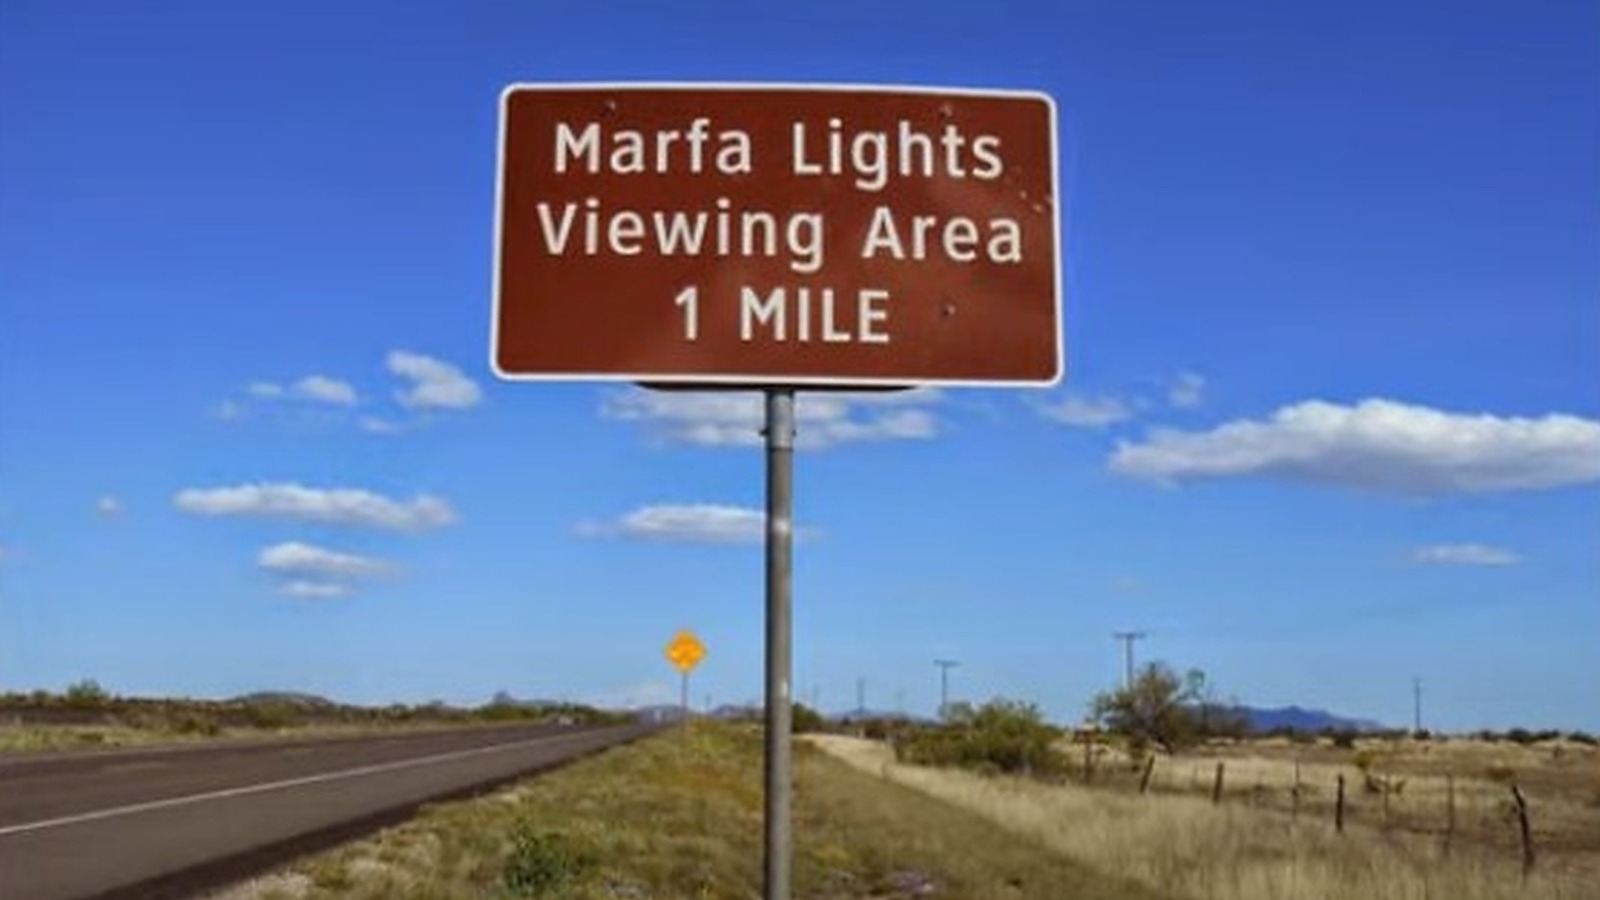 What Are The Marfa Lights?